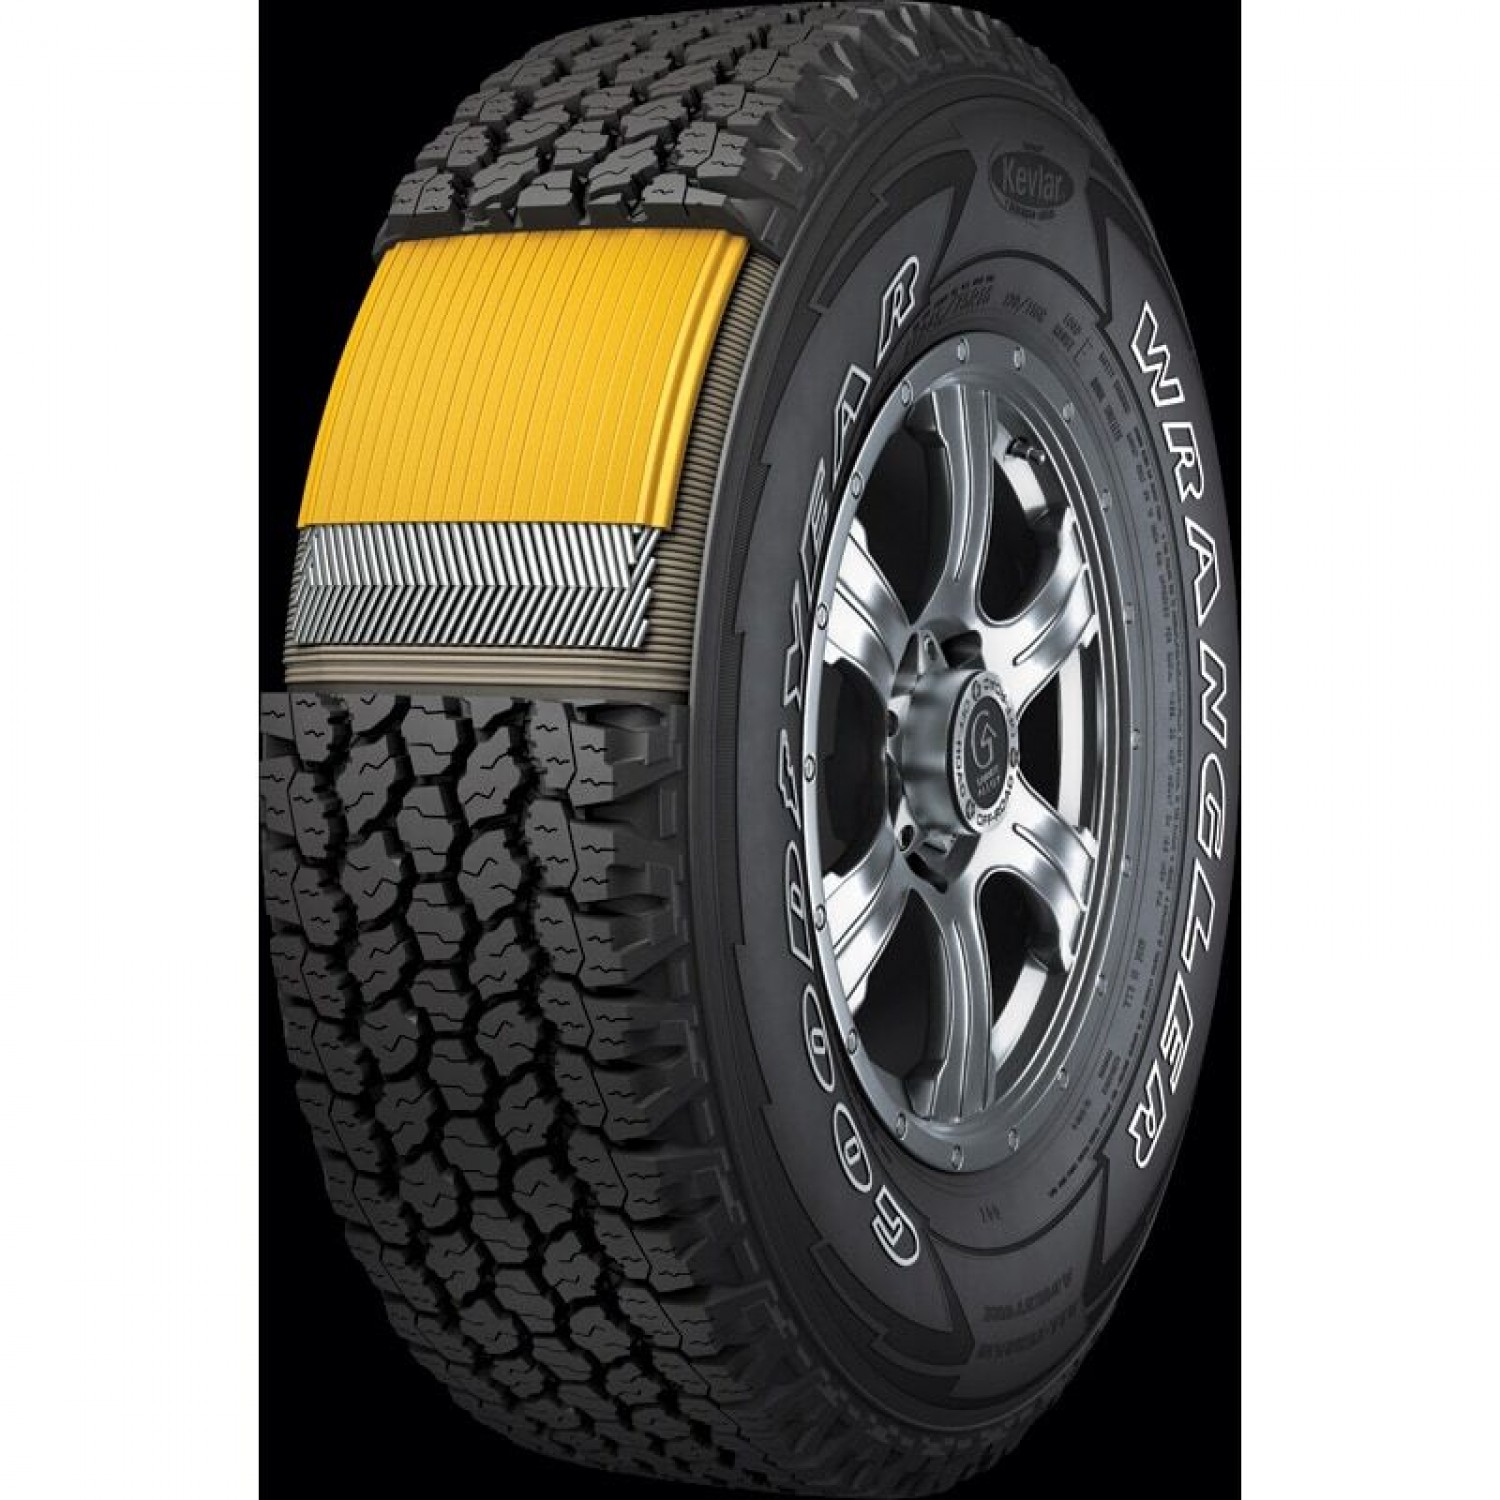 Goodyear Wrangler AT Adventure With Kevlar Outlined White Letters Tire (245/ 75R16 111T) vzn121233